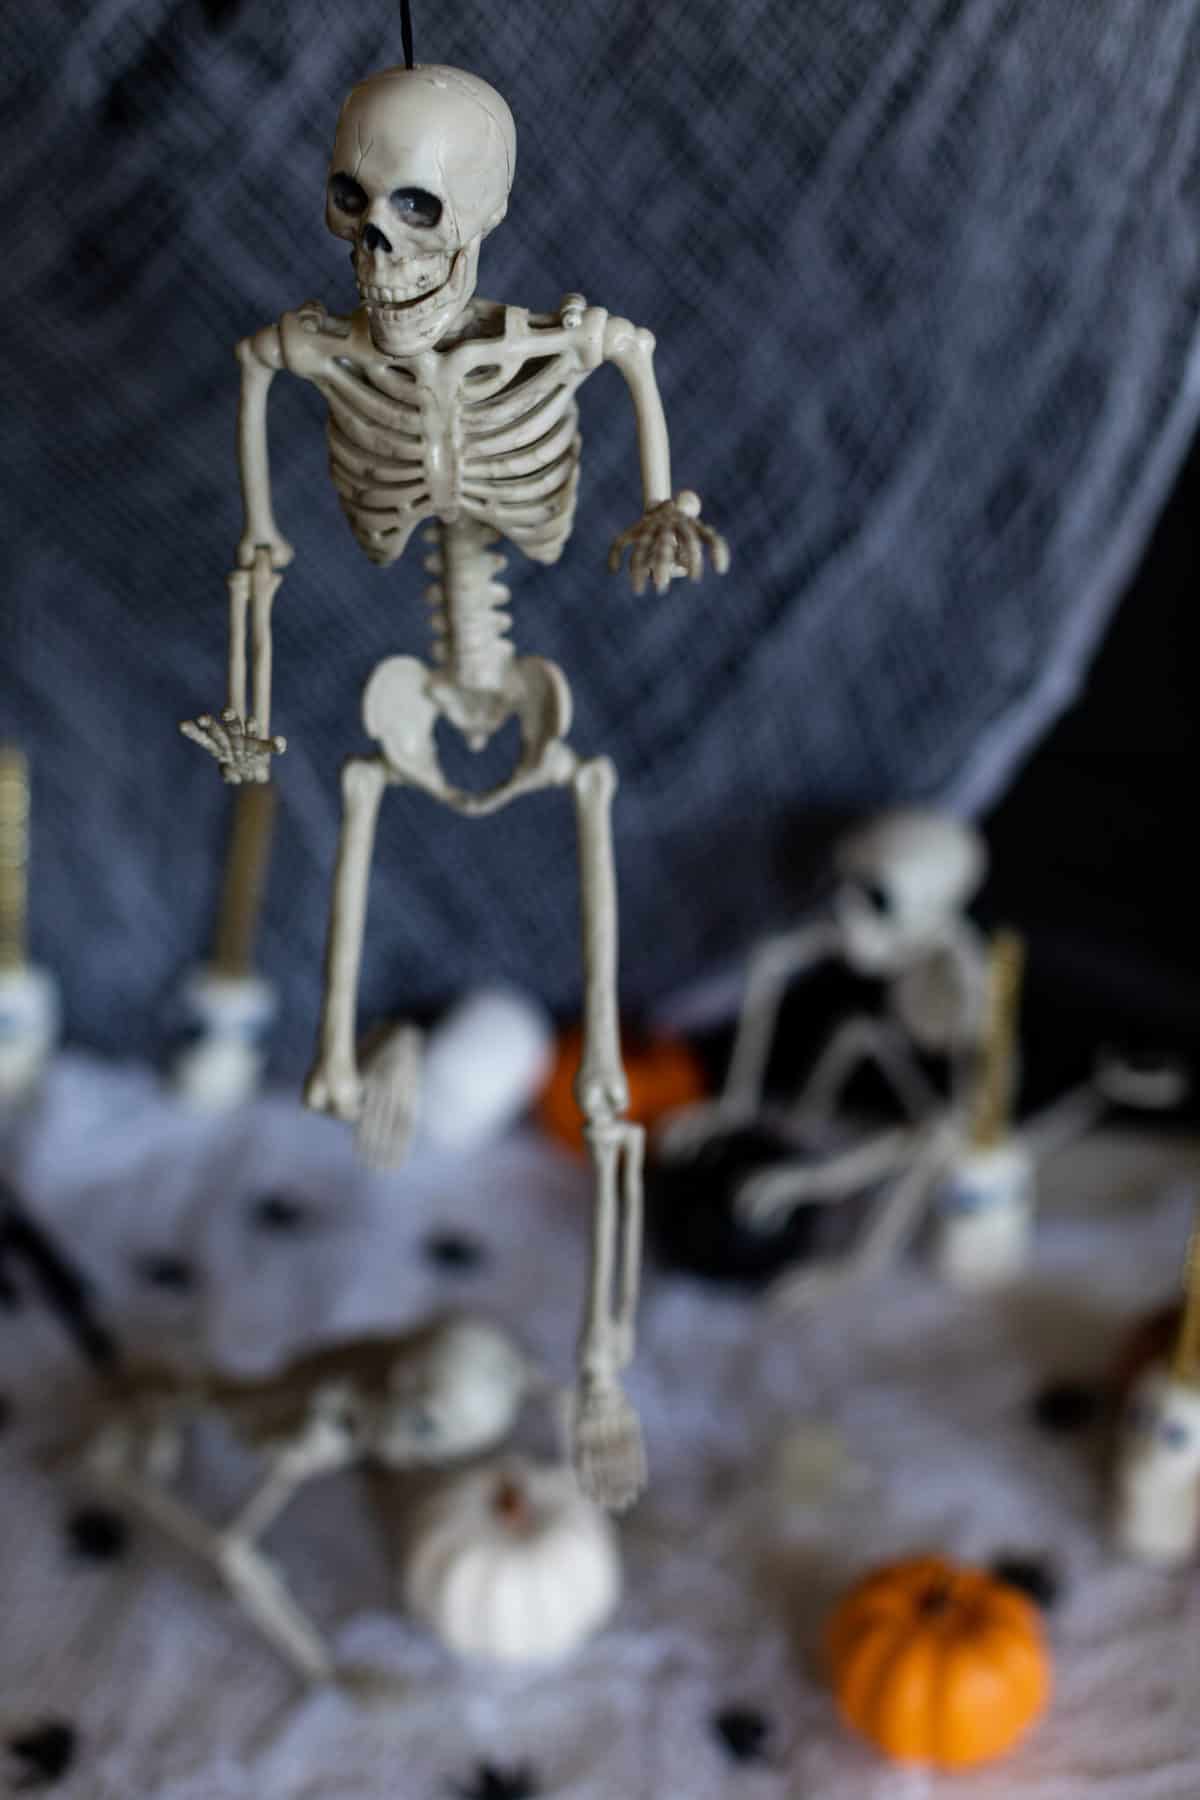 Skeleton hanging over a table.